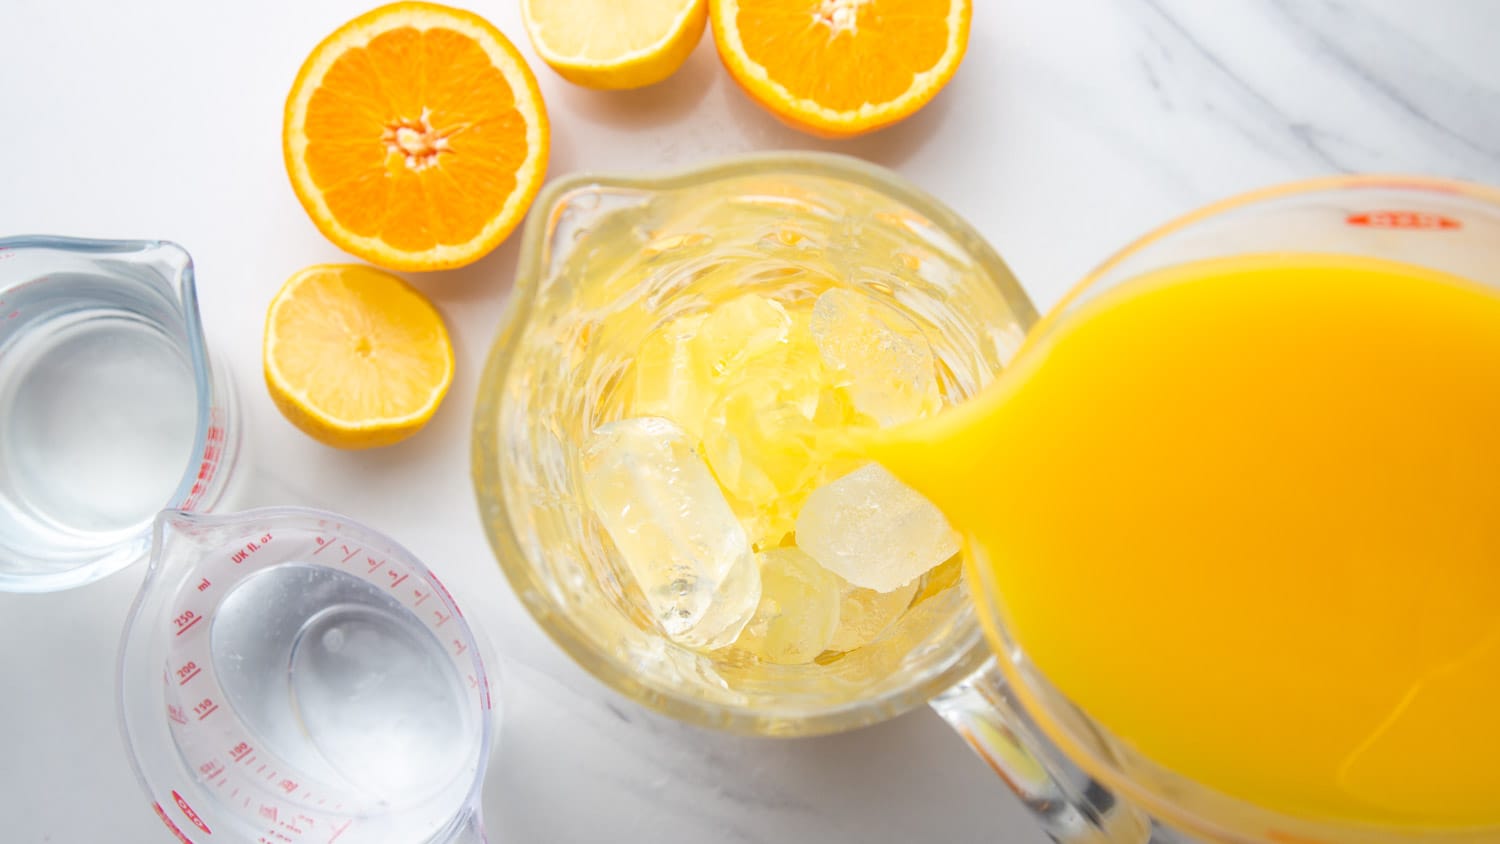 Pouring orange juice into a pitcher filled with ice.